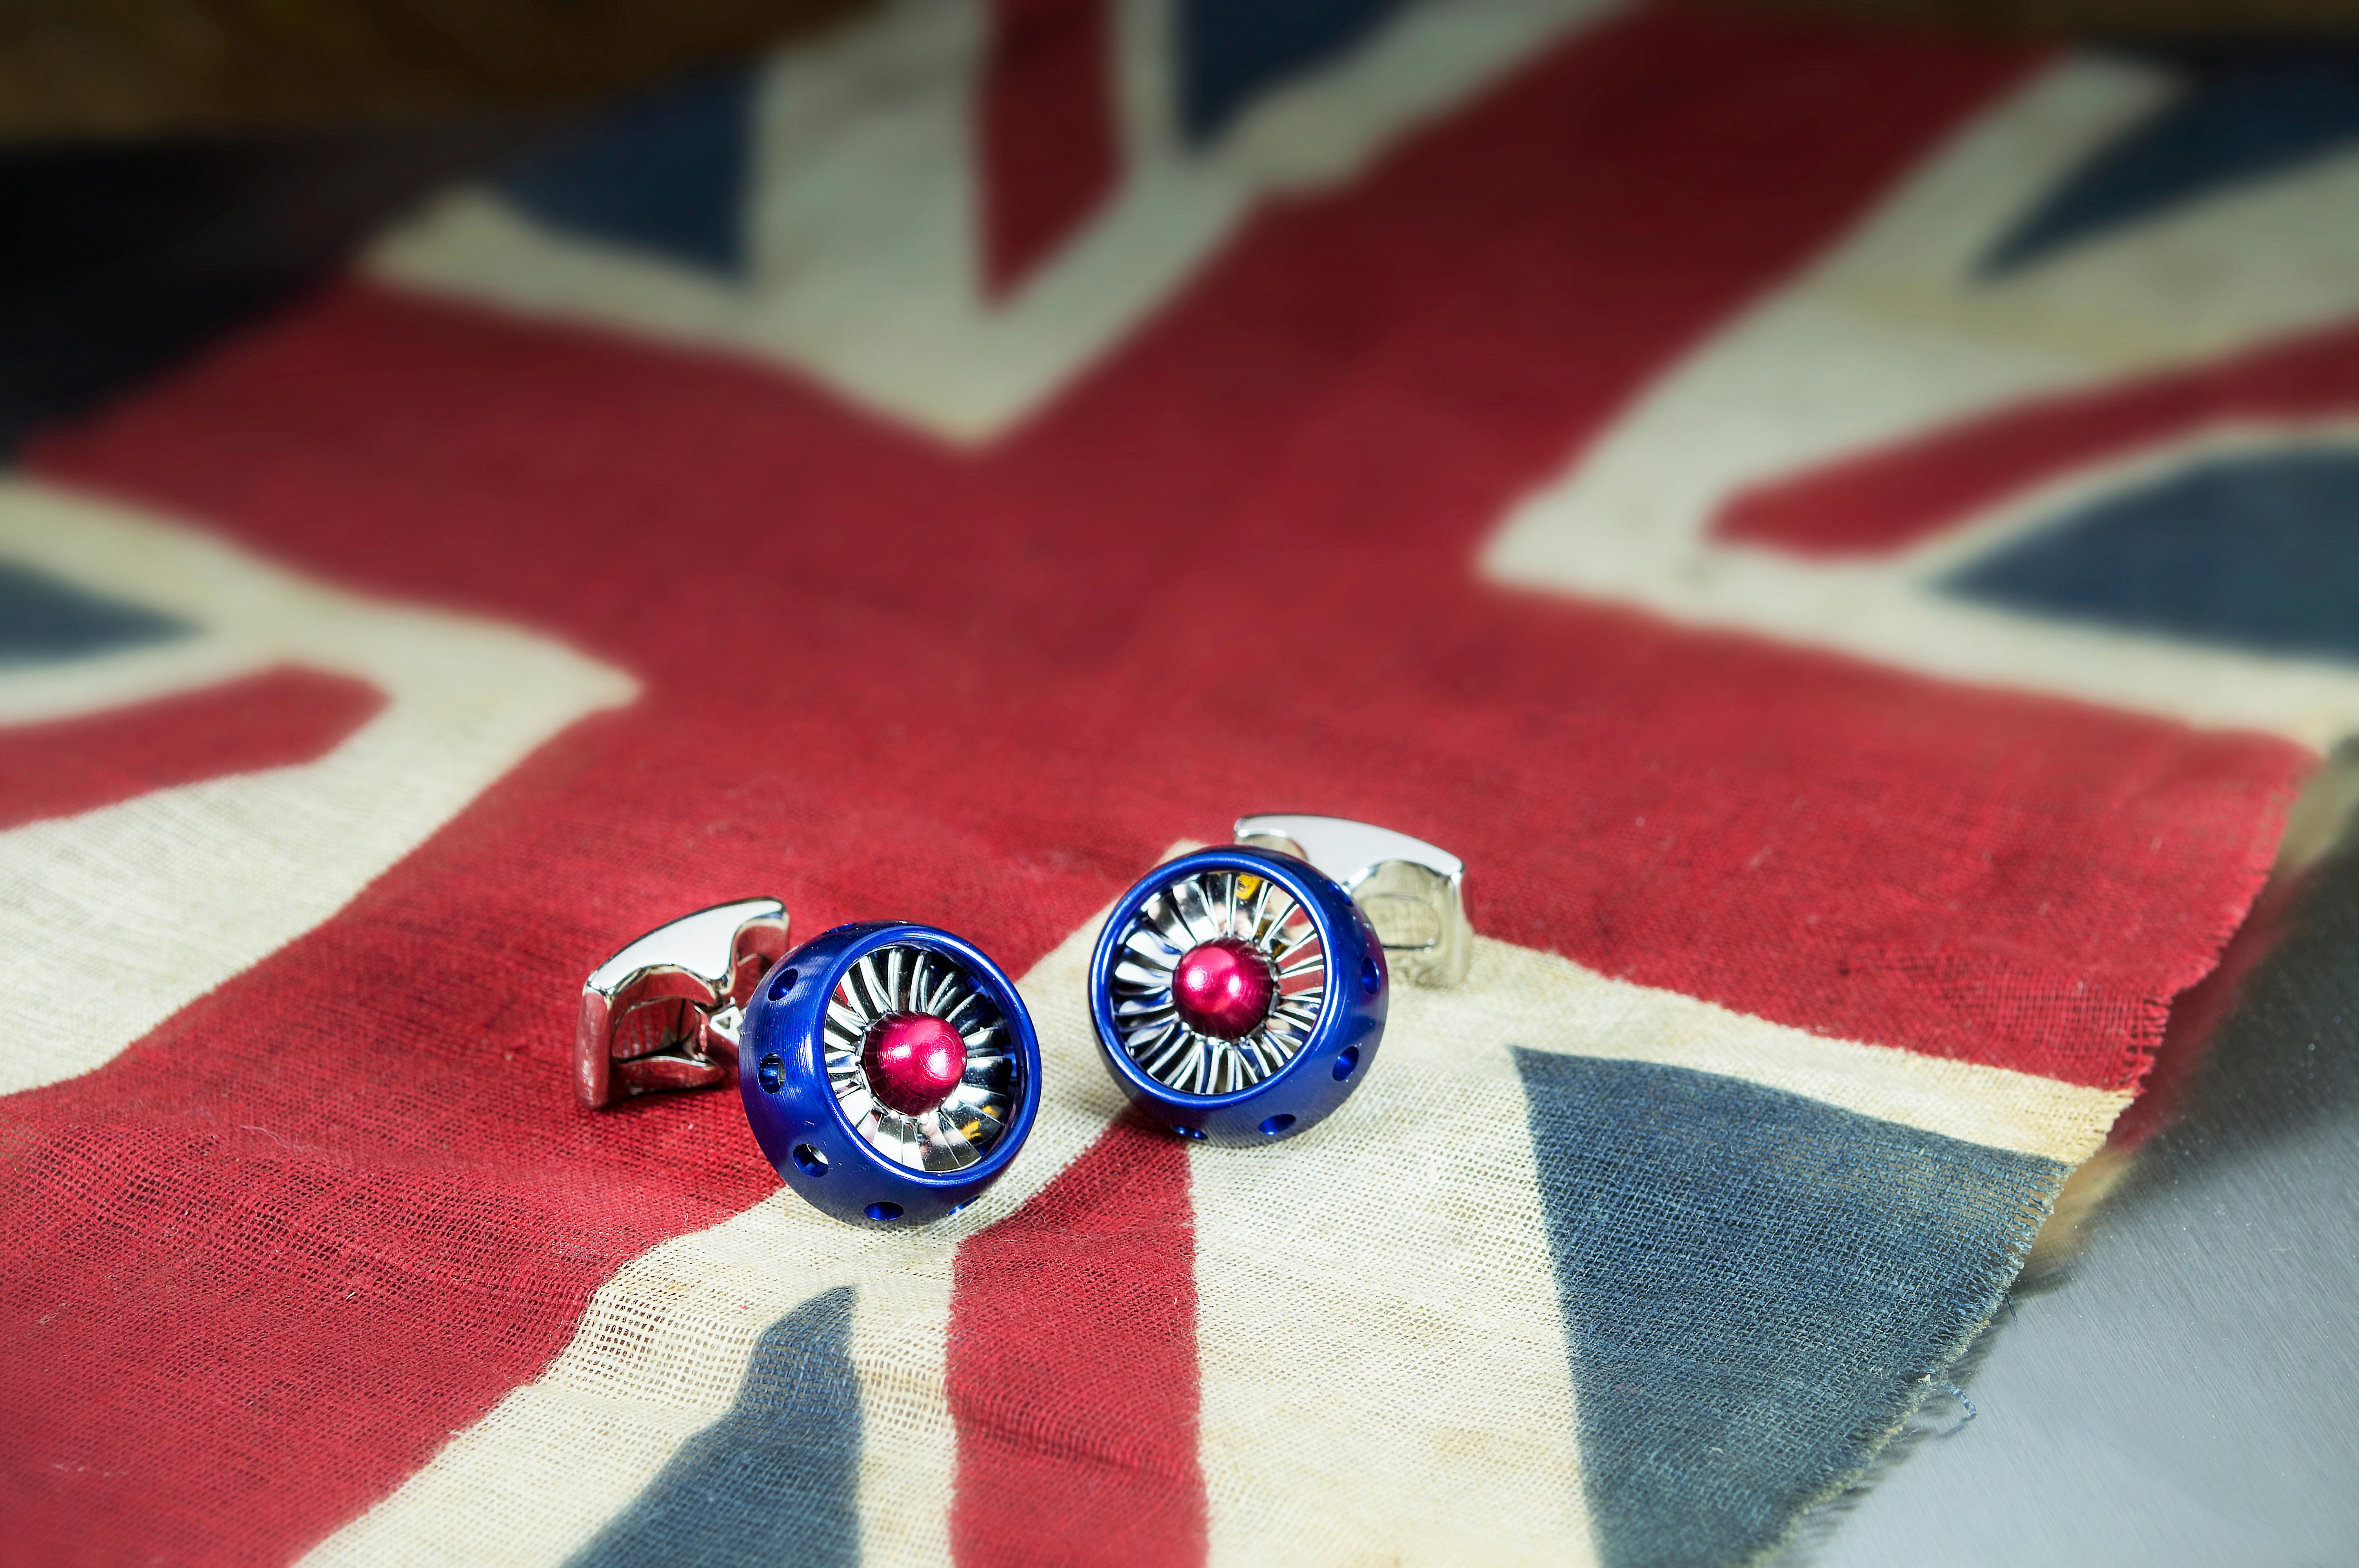 DEAKIN & FRANCIS, Piccadilly Arcade, London

Made from aircraft grade aluminium, these JET turbine engine cufflinks have been beautifully engineered to the highest standards. With a realistic nose cone, the double stamped blades sit on